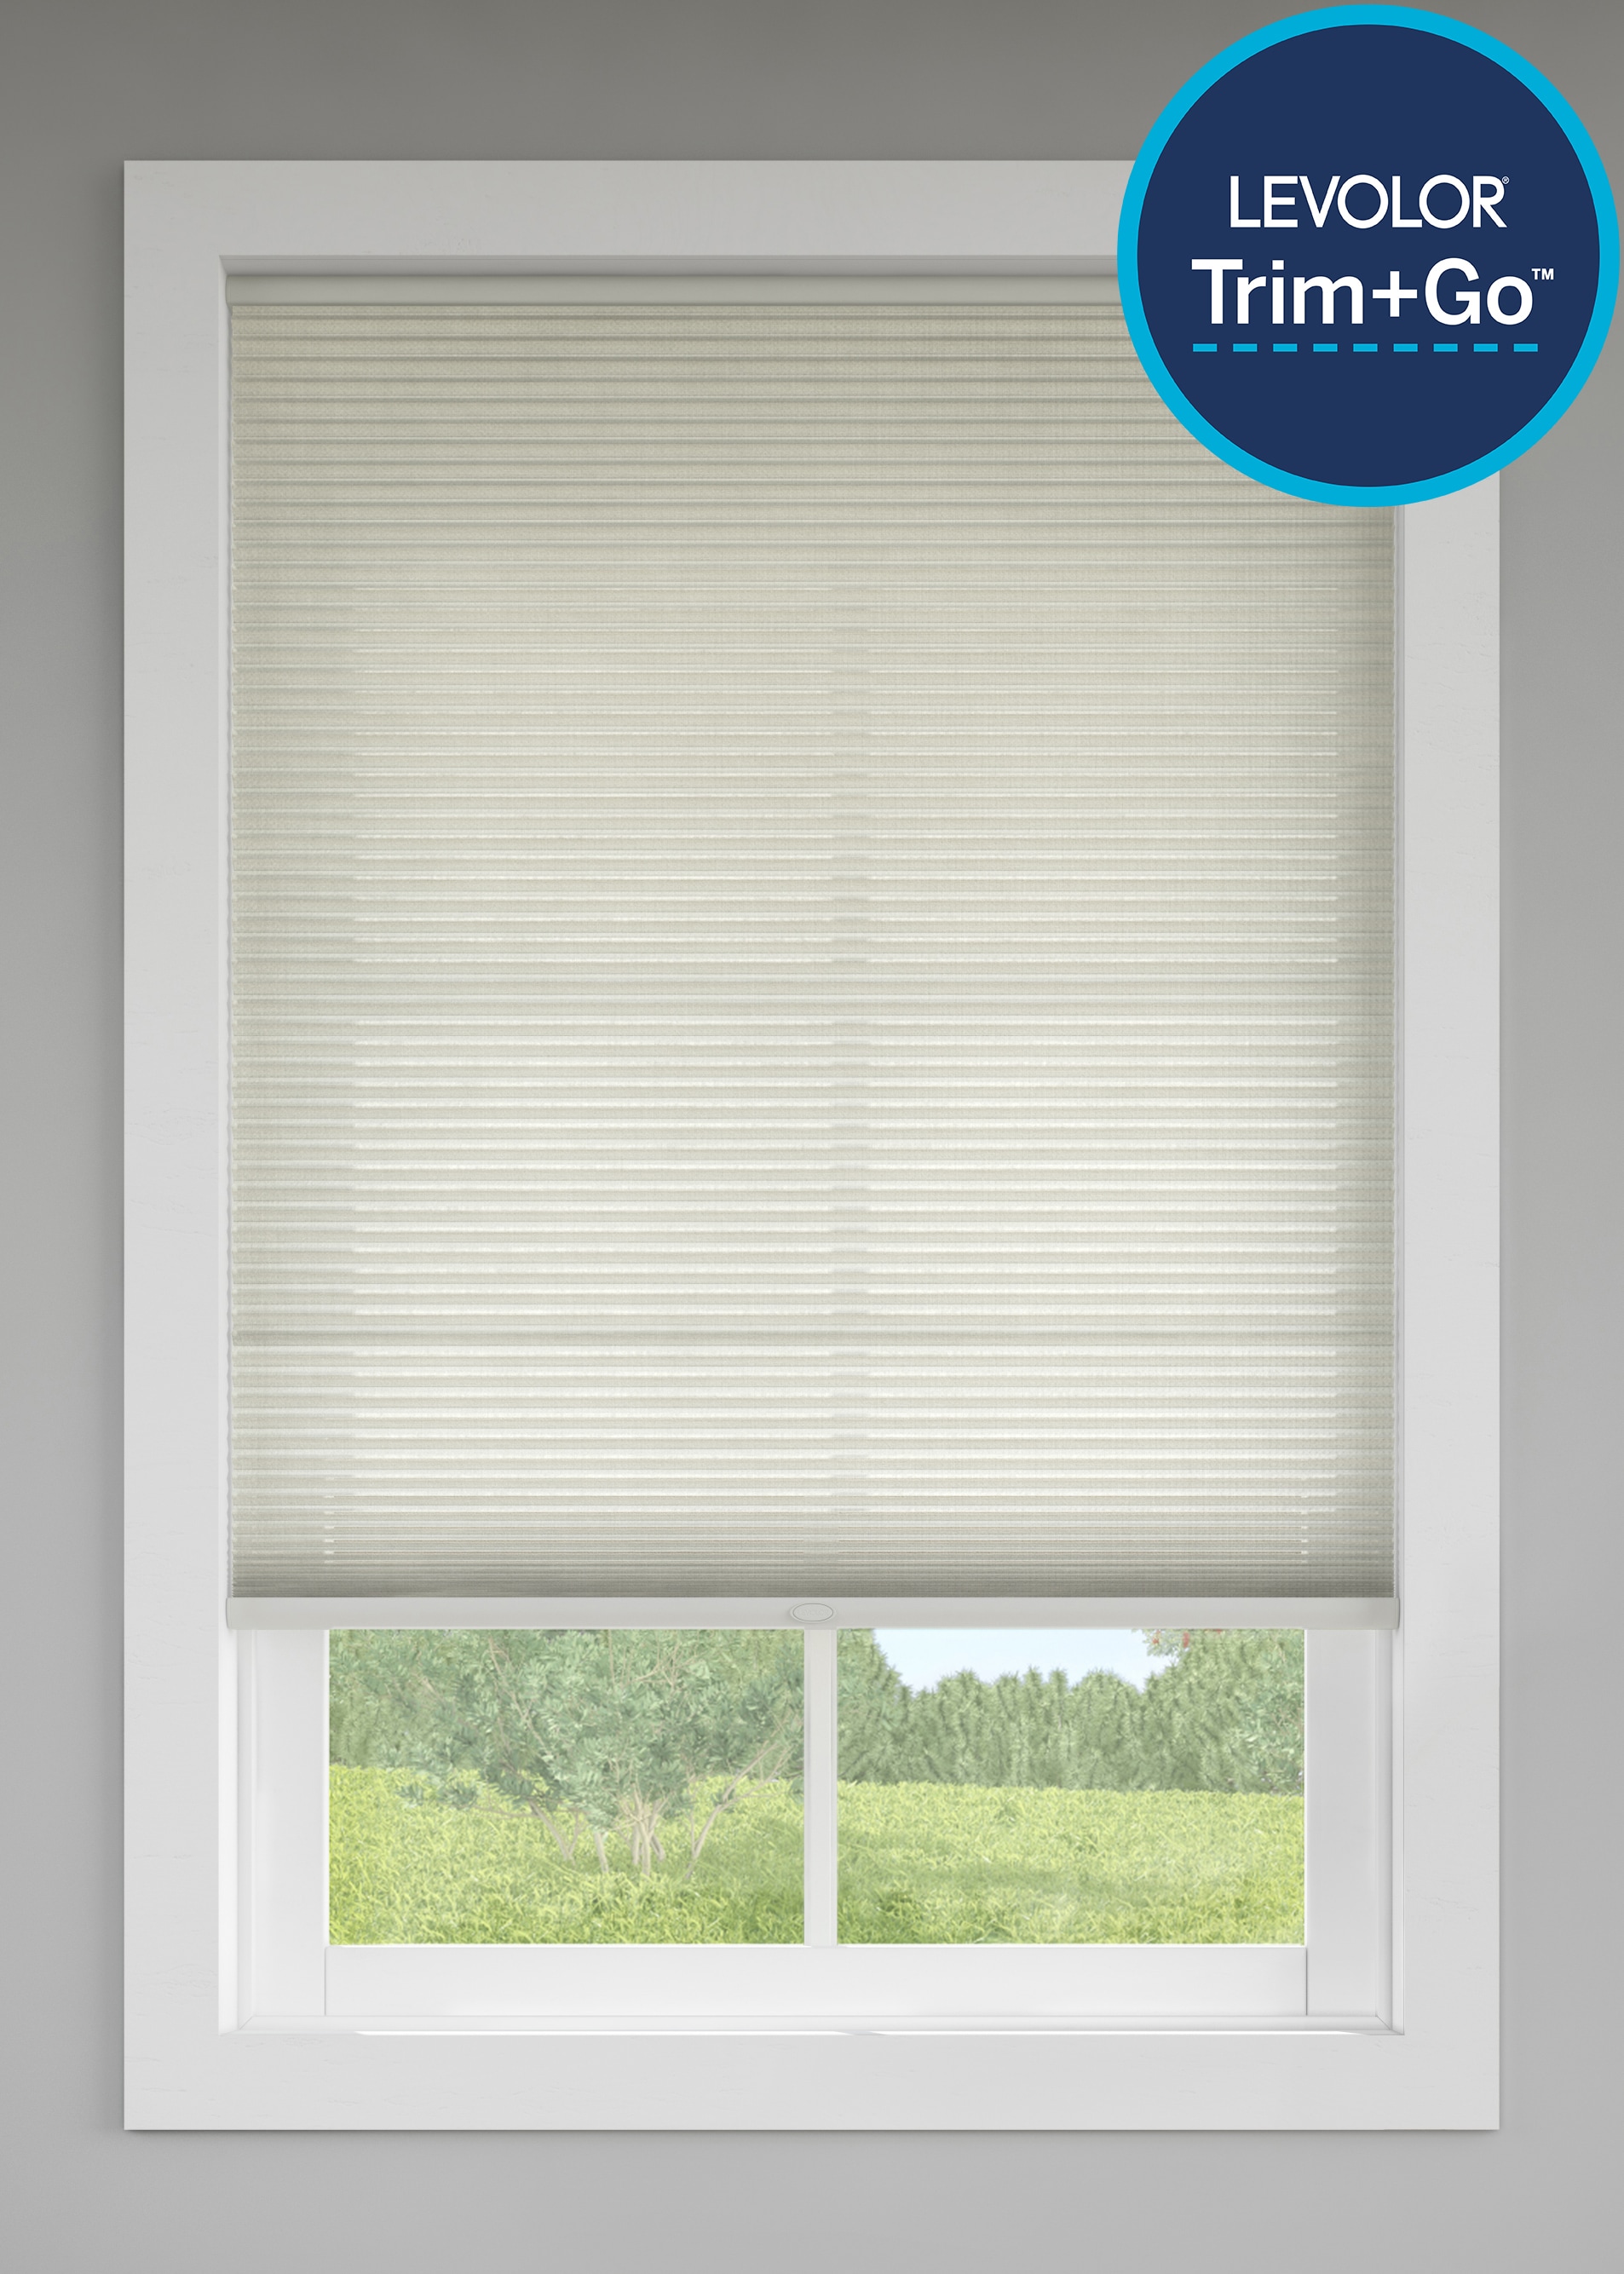 Details about   56" W X 72" H Beige Privacy & Light Filtering Cordless Cellular Shades Window Bl 